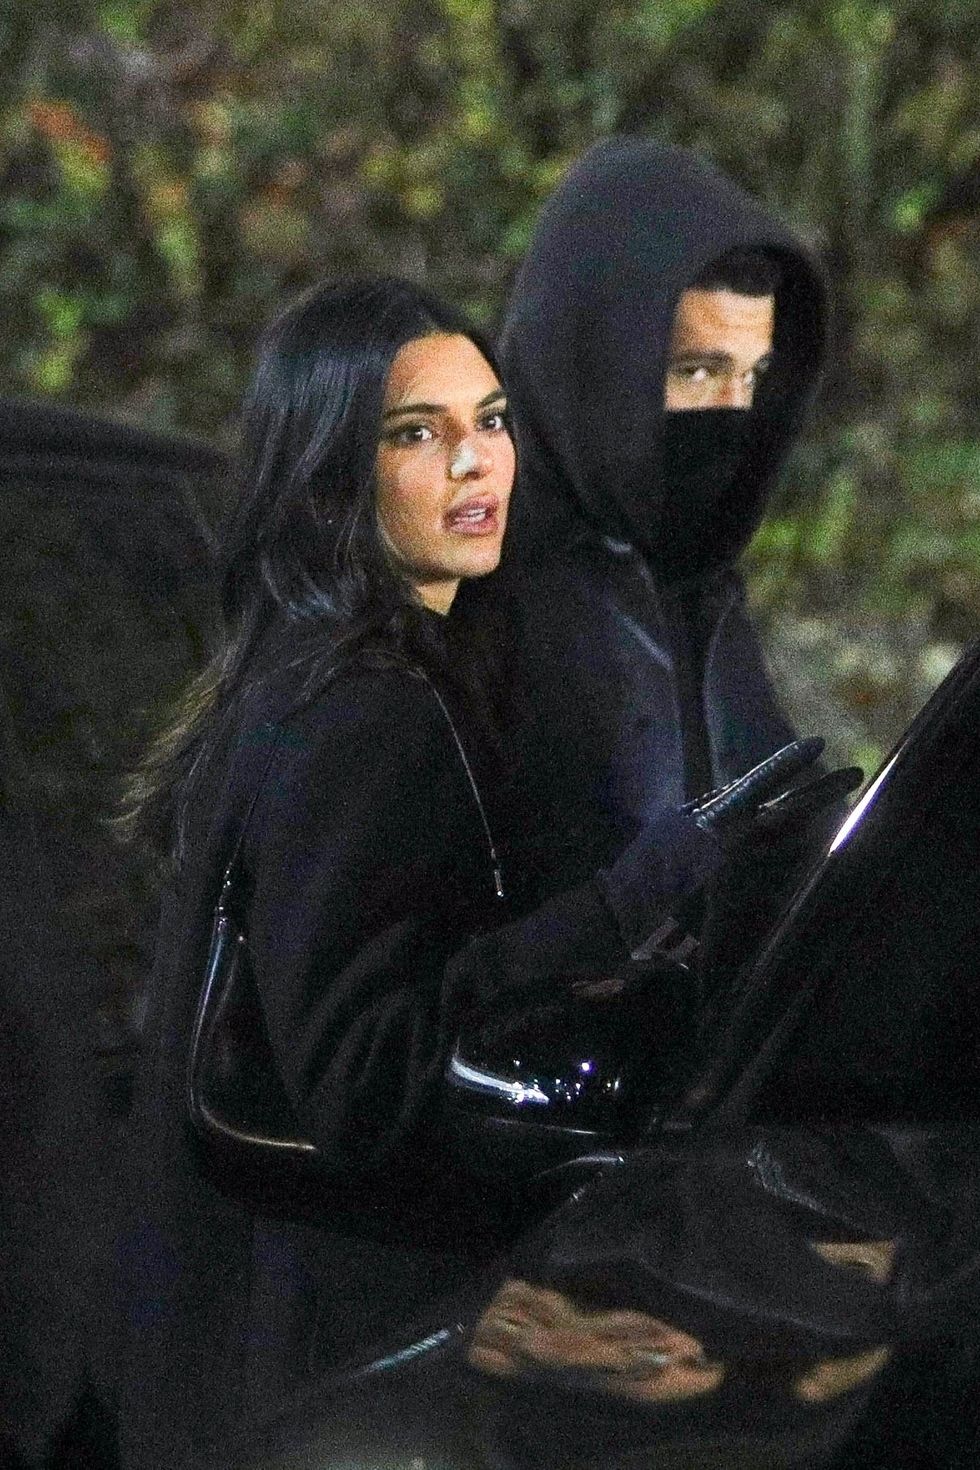 kendall jenner and devin booker on a rare date out